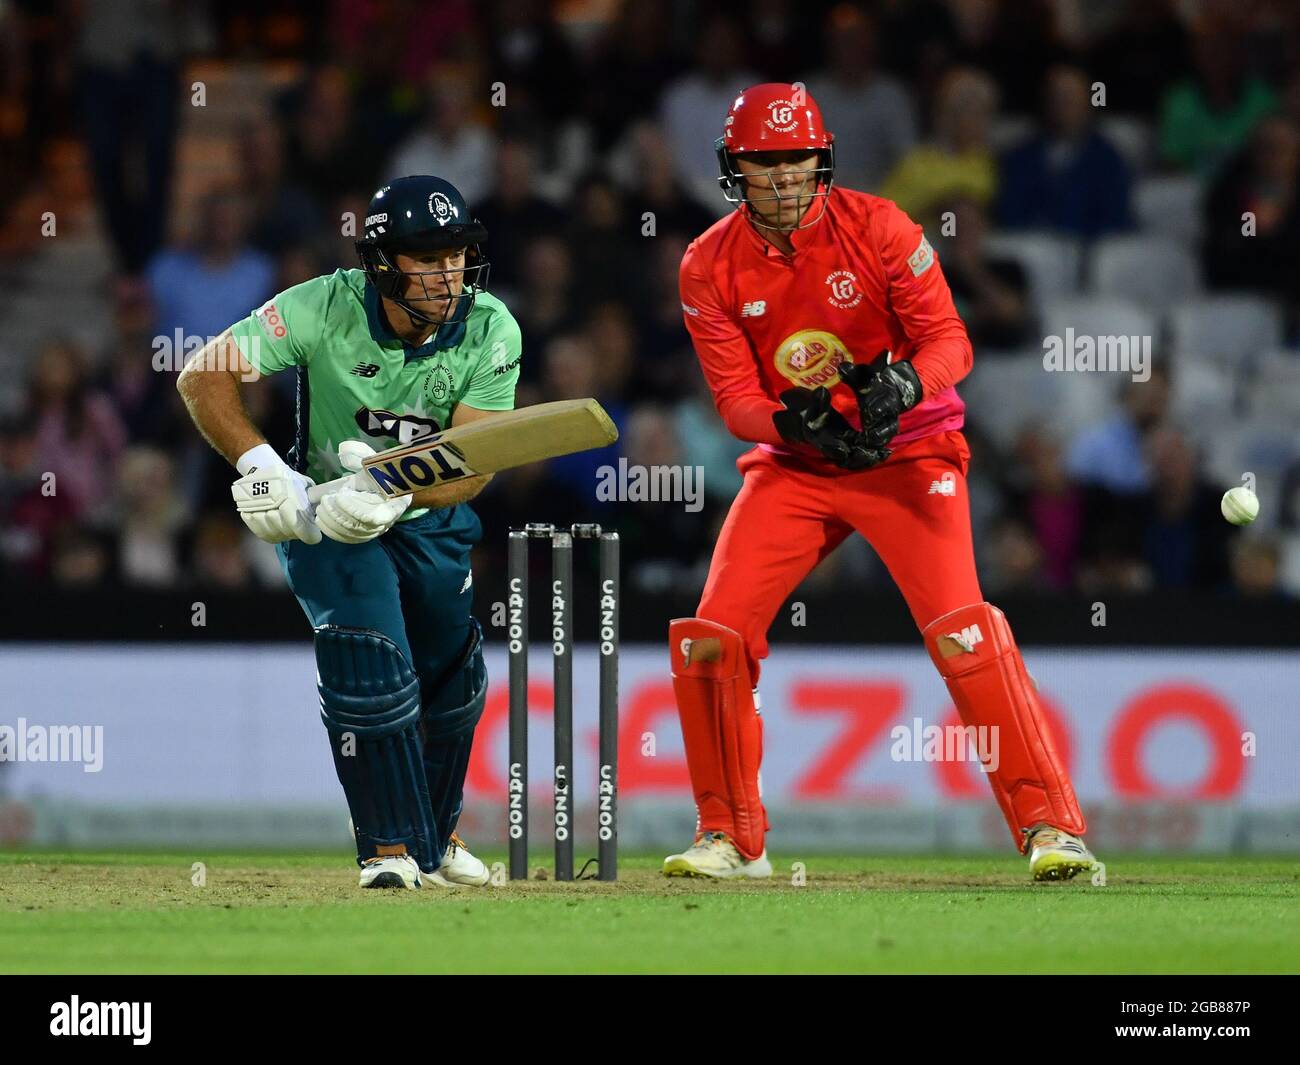 The Kia Oval London Uk Nd August Oval Invincibles Colin Ingram In Action During The